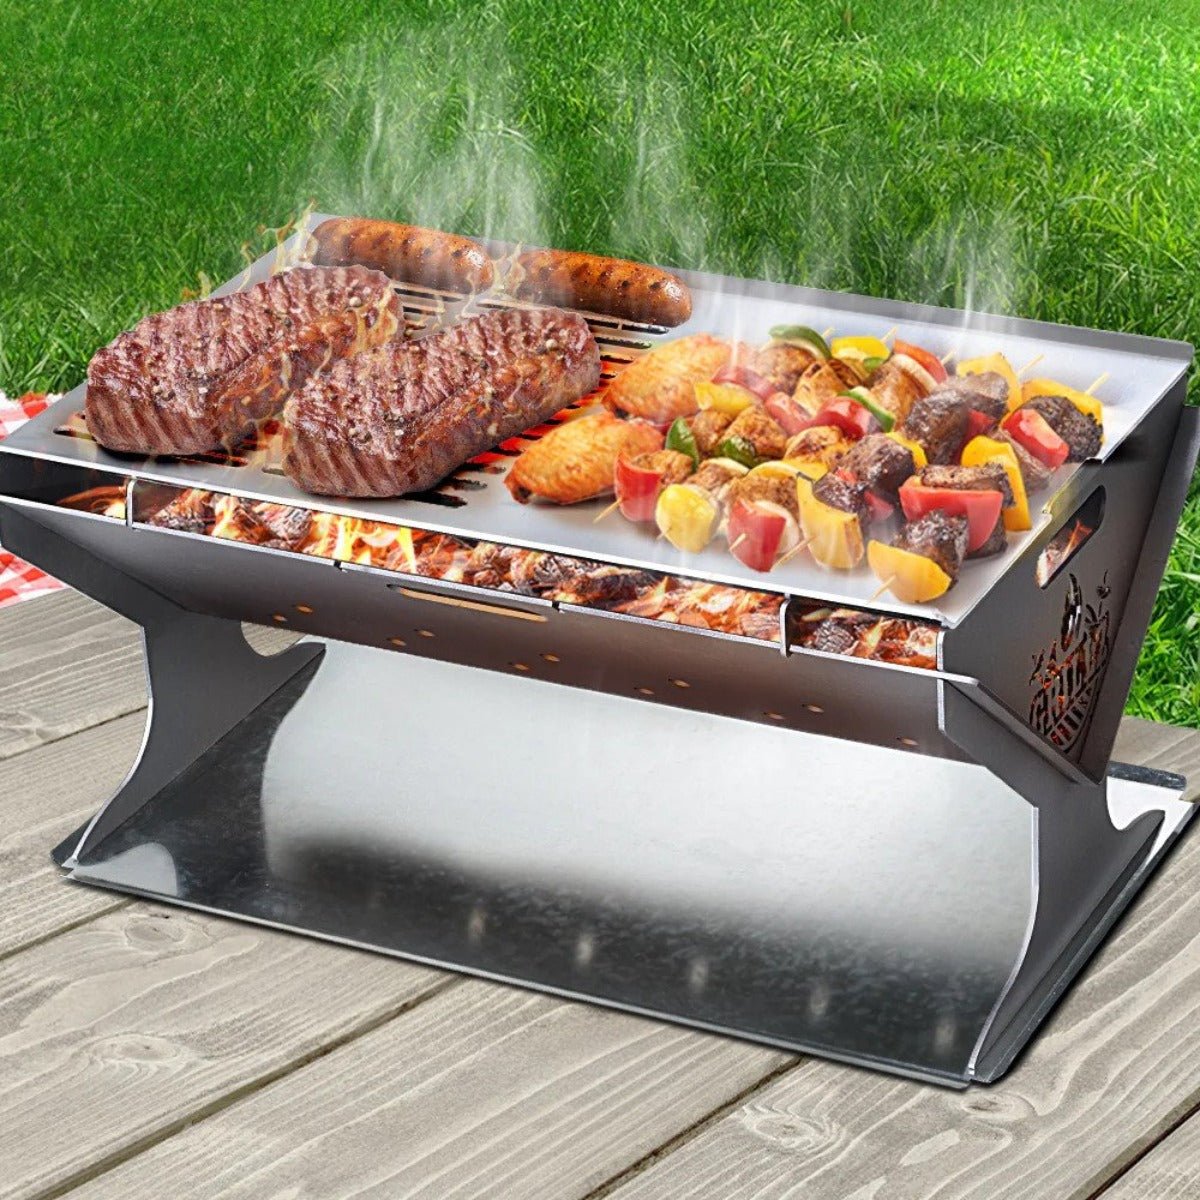 Grillz Fire Pit BBQ Outdoor Camping Portable Patio Heater Folding Packed Steel - Outdoorium